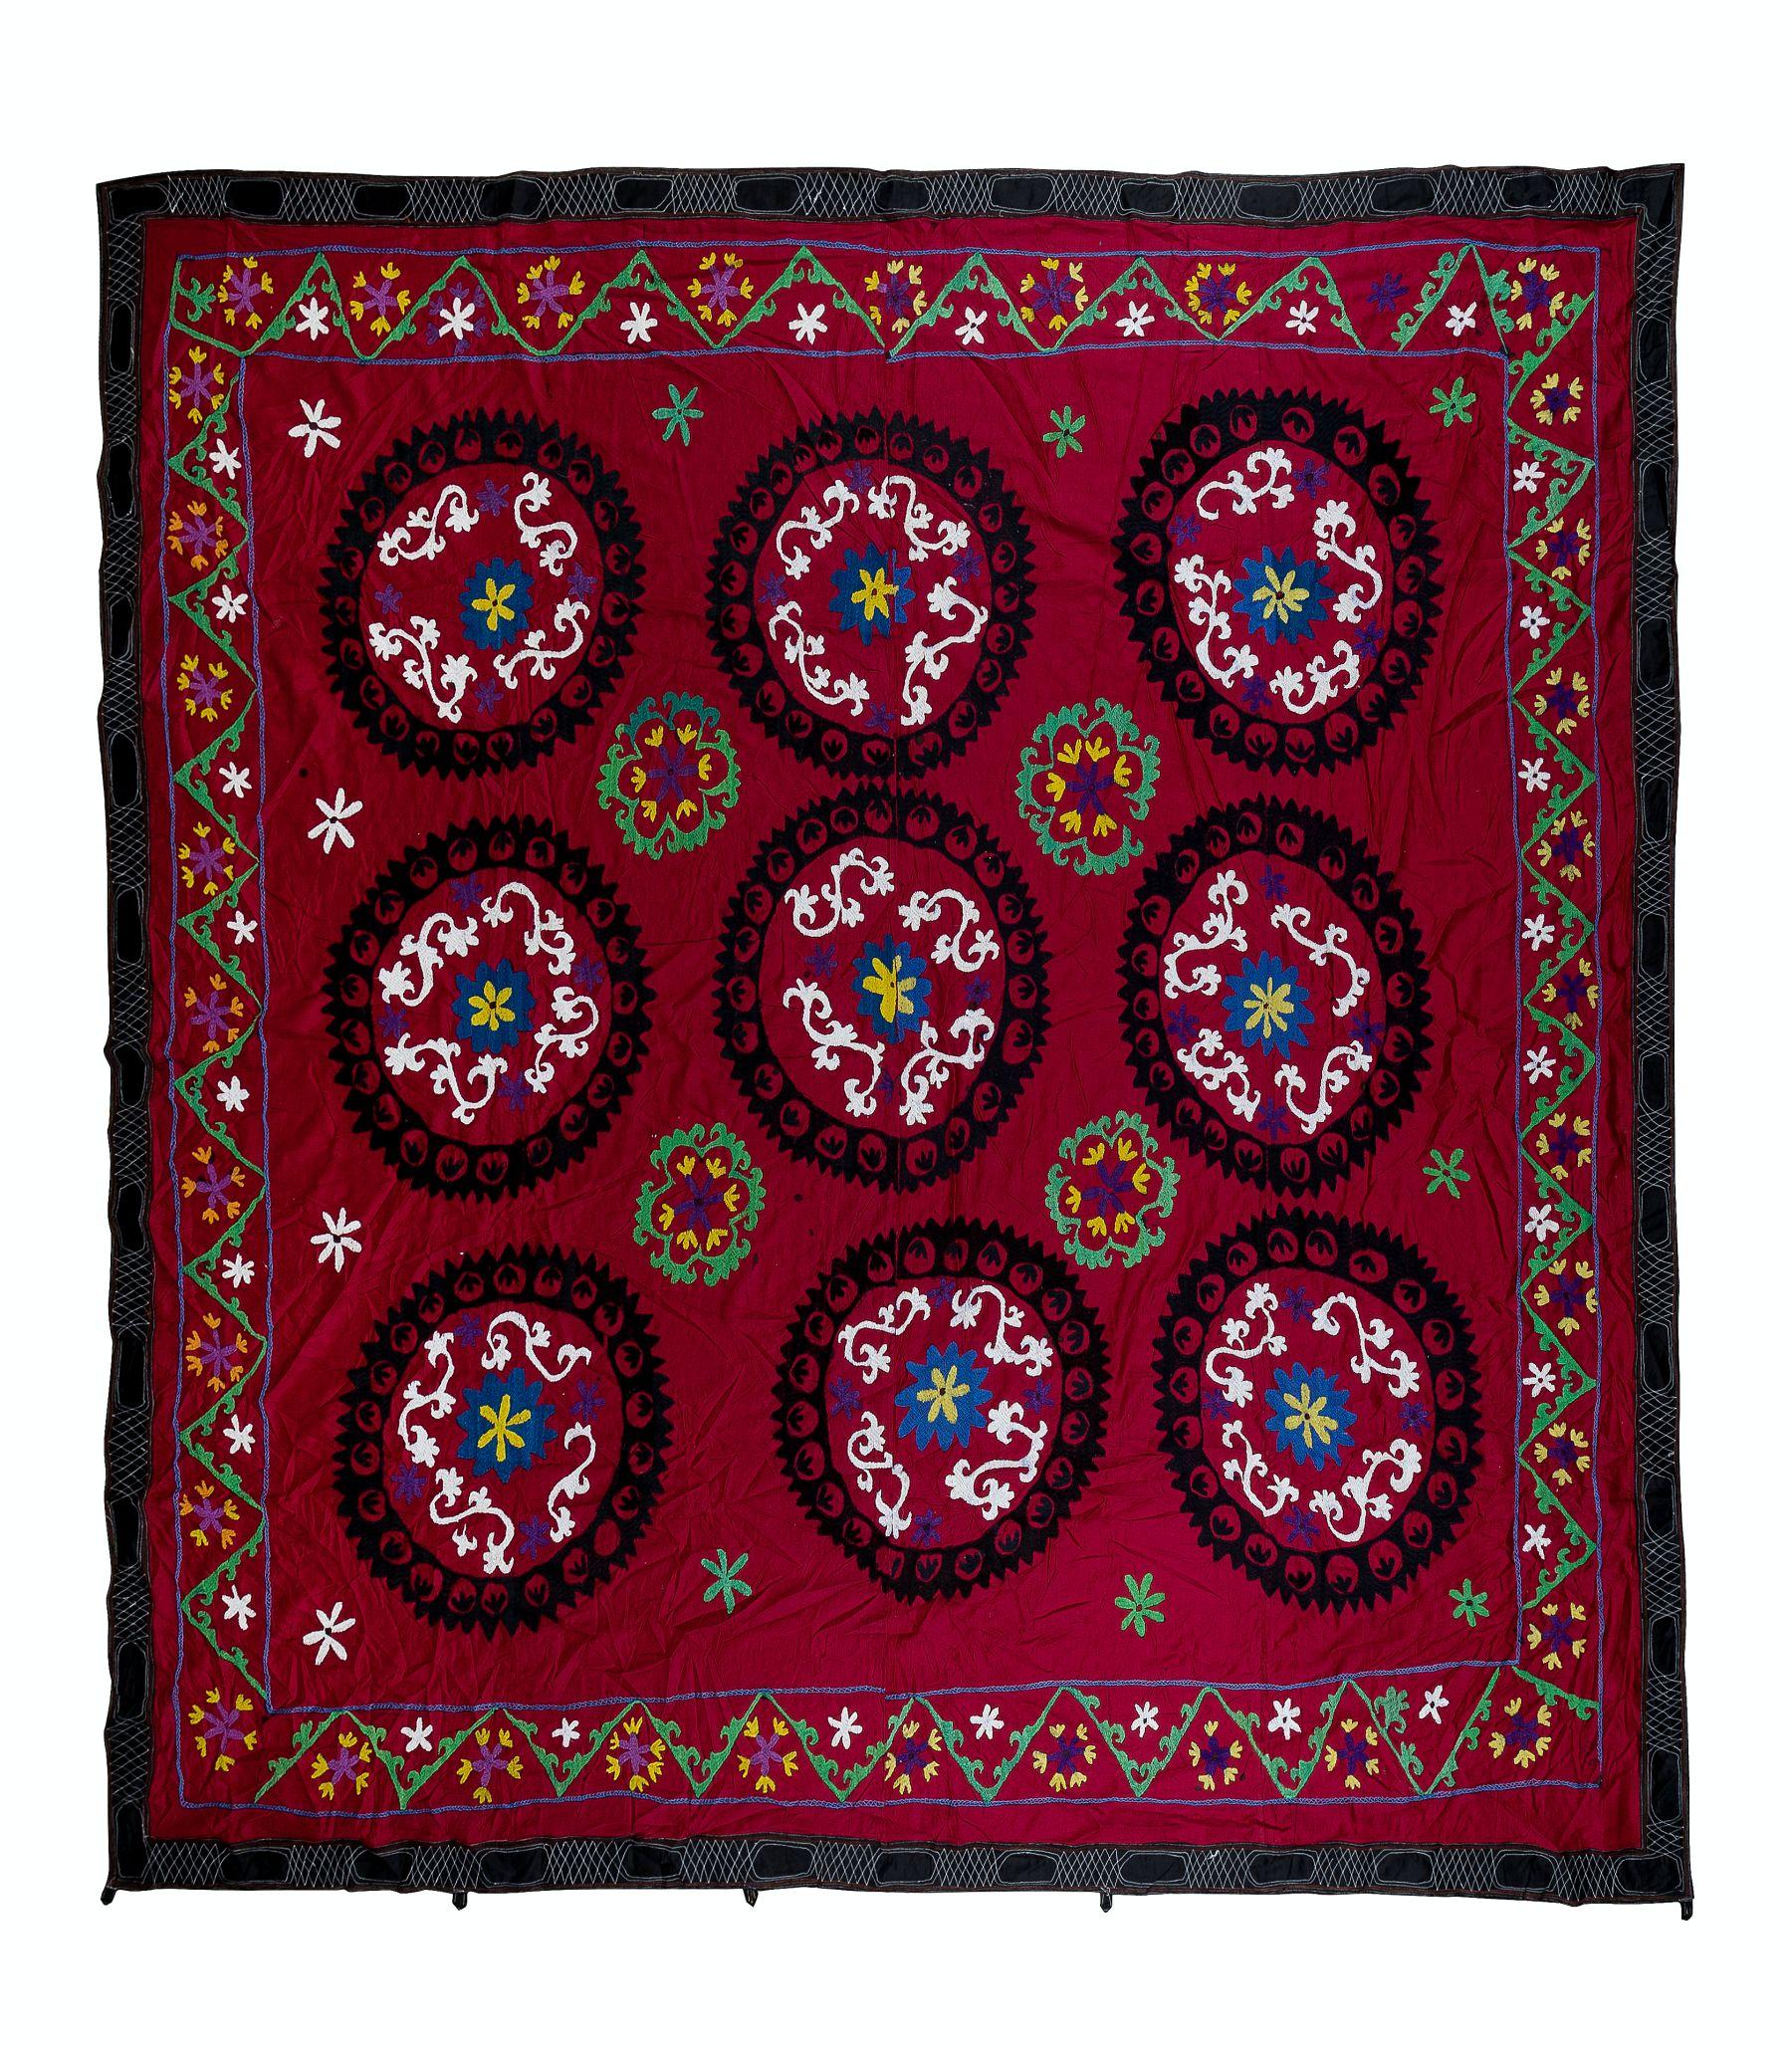 8.3x8.3 Ft Vintage Silk Embroidery Bedspread, Central Asian Suzani Bed Cover